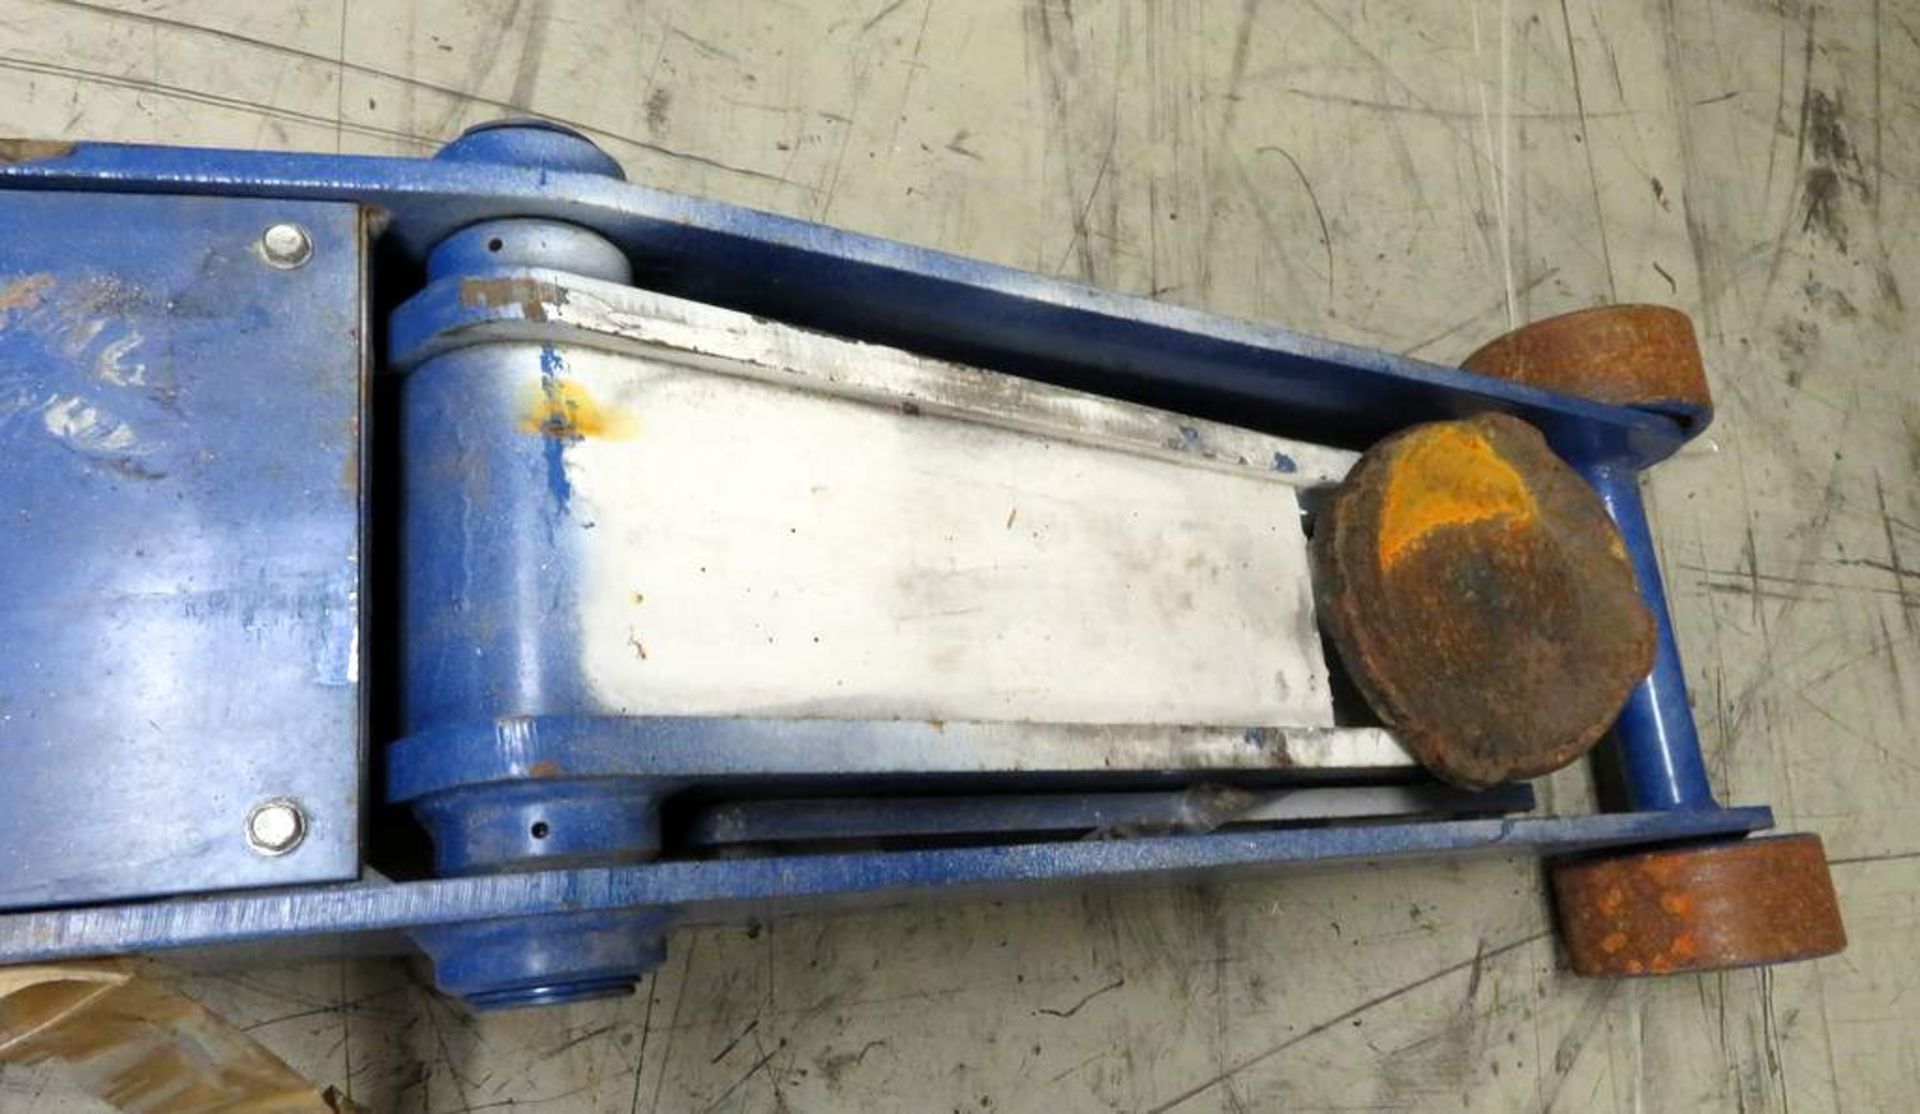 Weber 10 Tonne Vehicle Trolley Jack Complete With Handle - WDK100LQ - Working Condition - Image 5 of 7